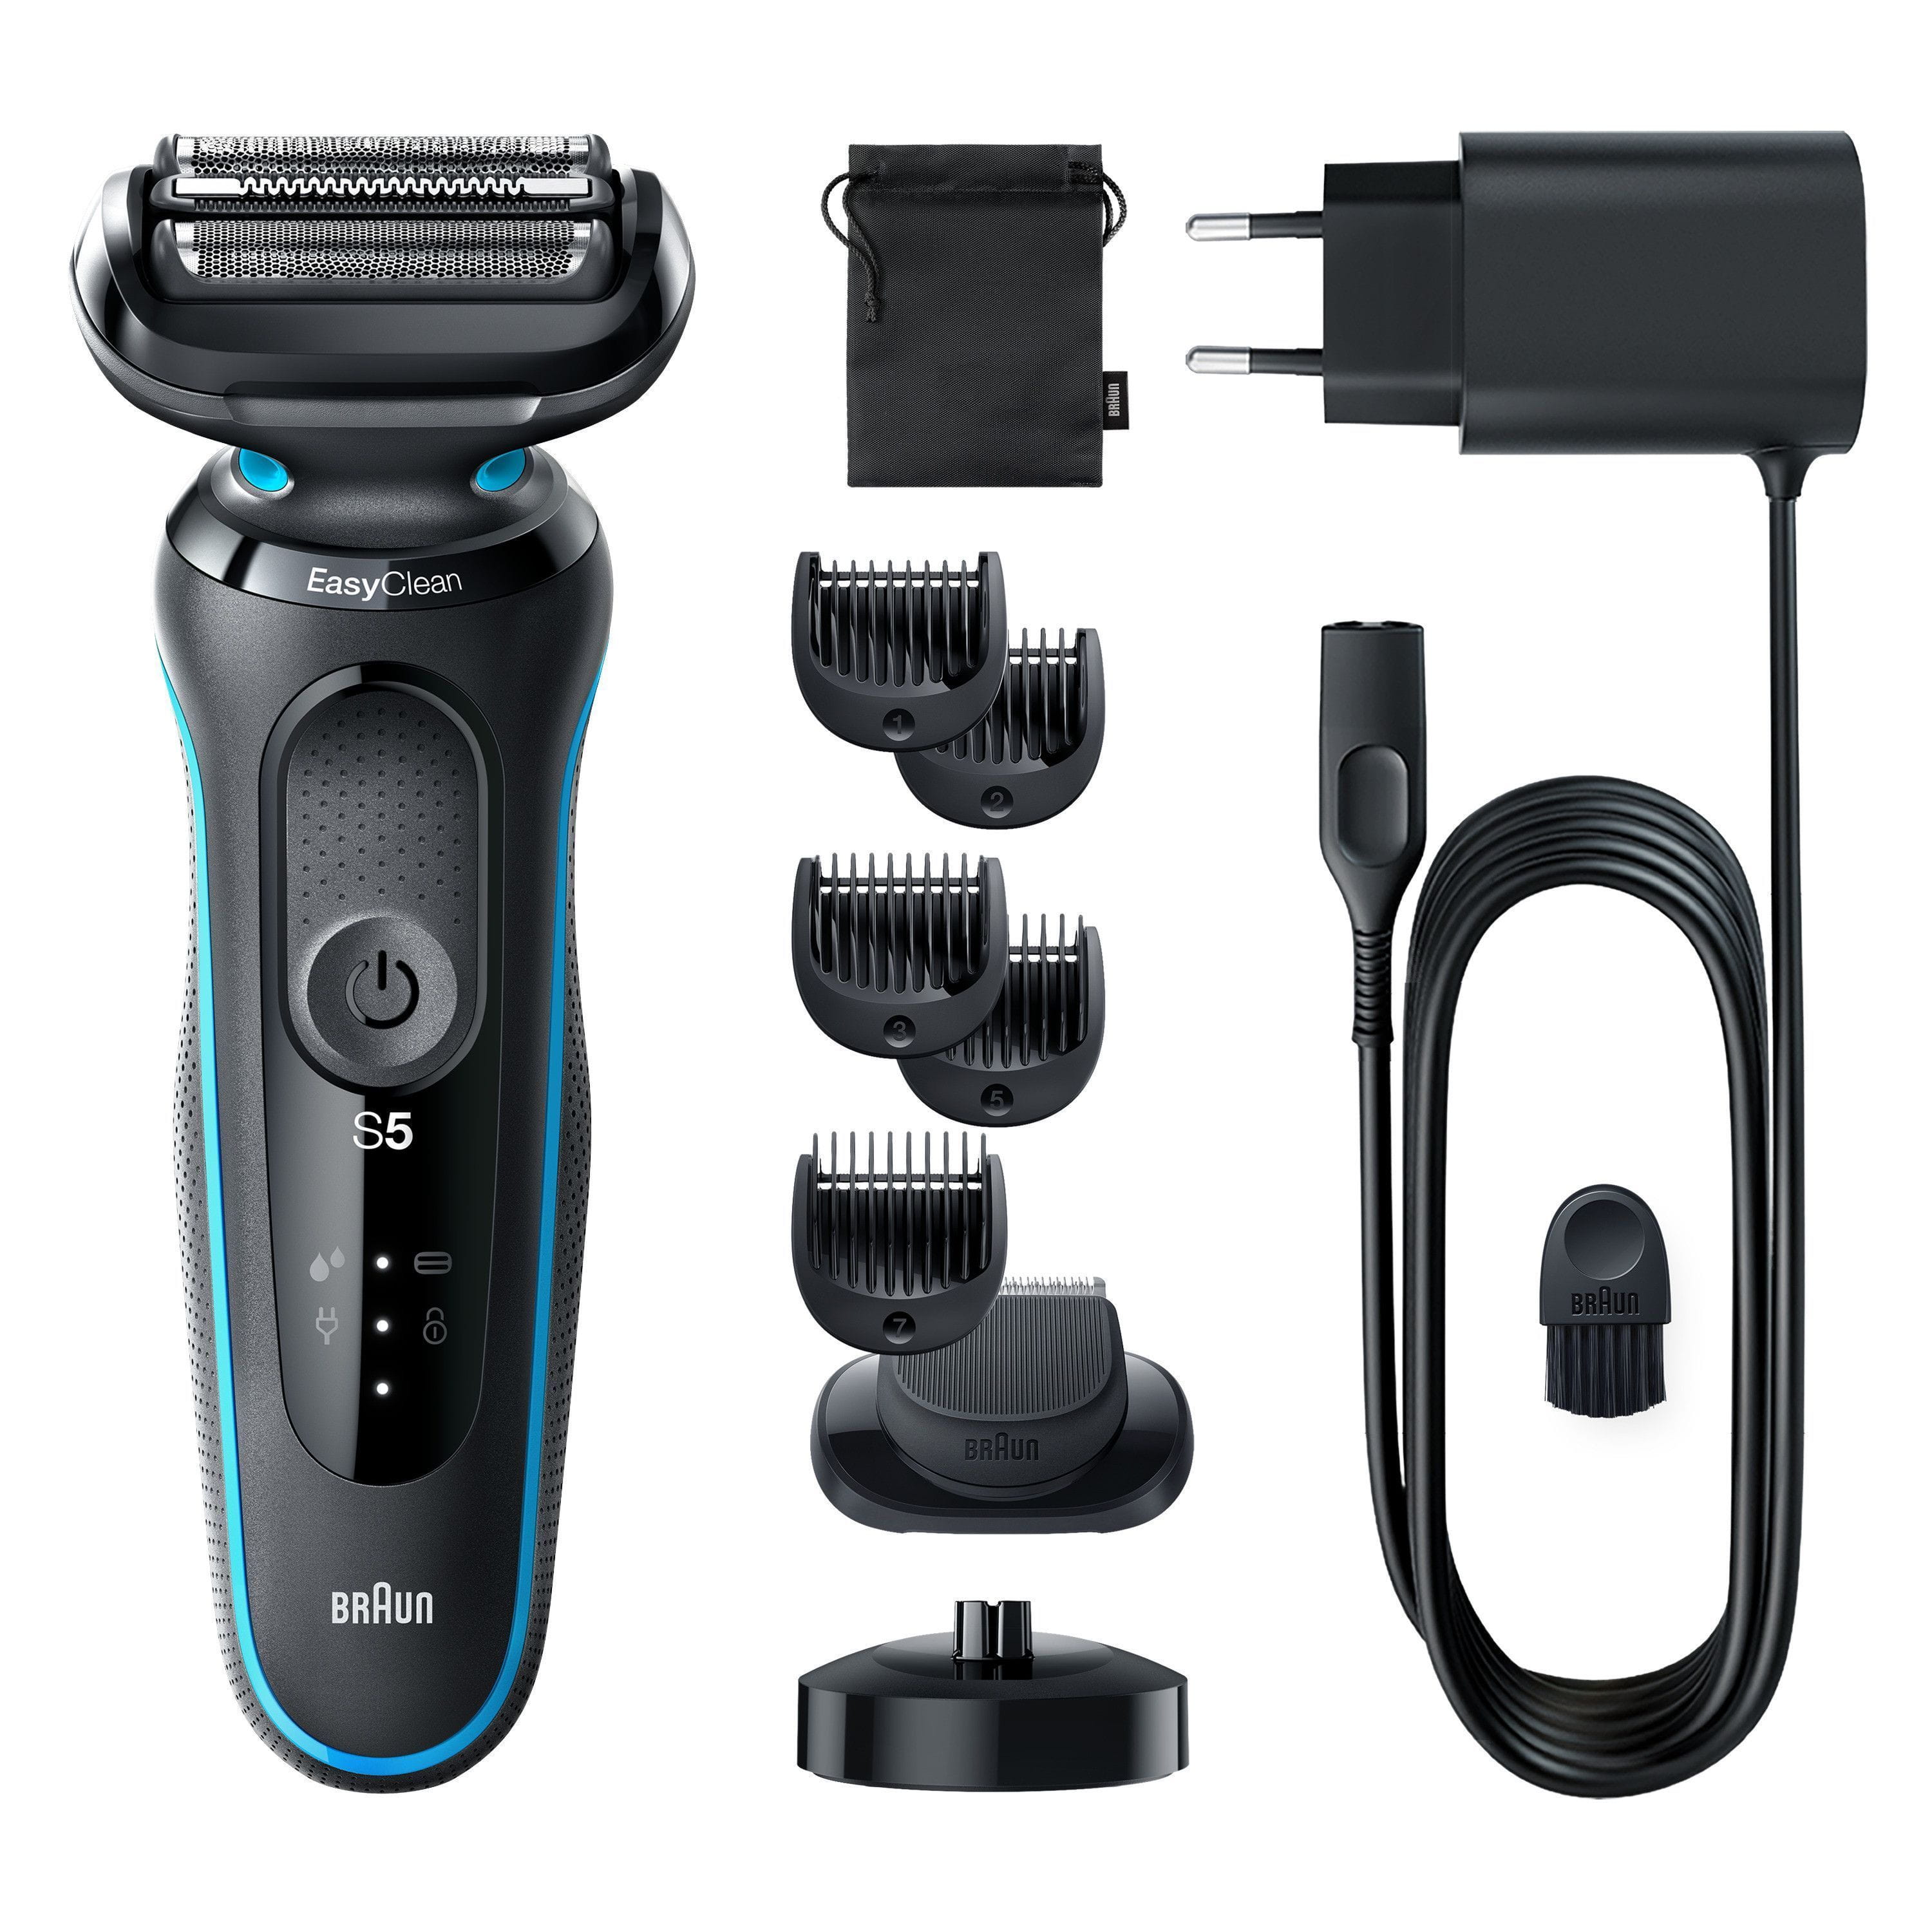 Braun - 51-M4500cs Shaver with Trimmer